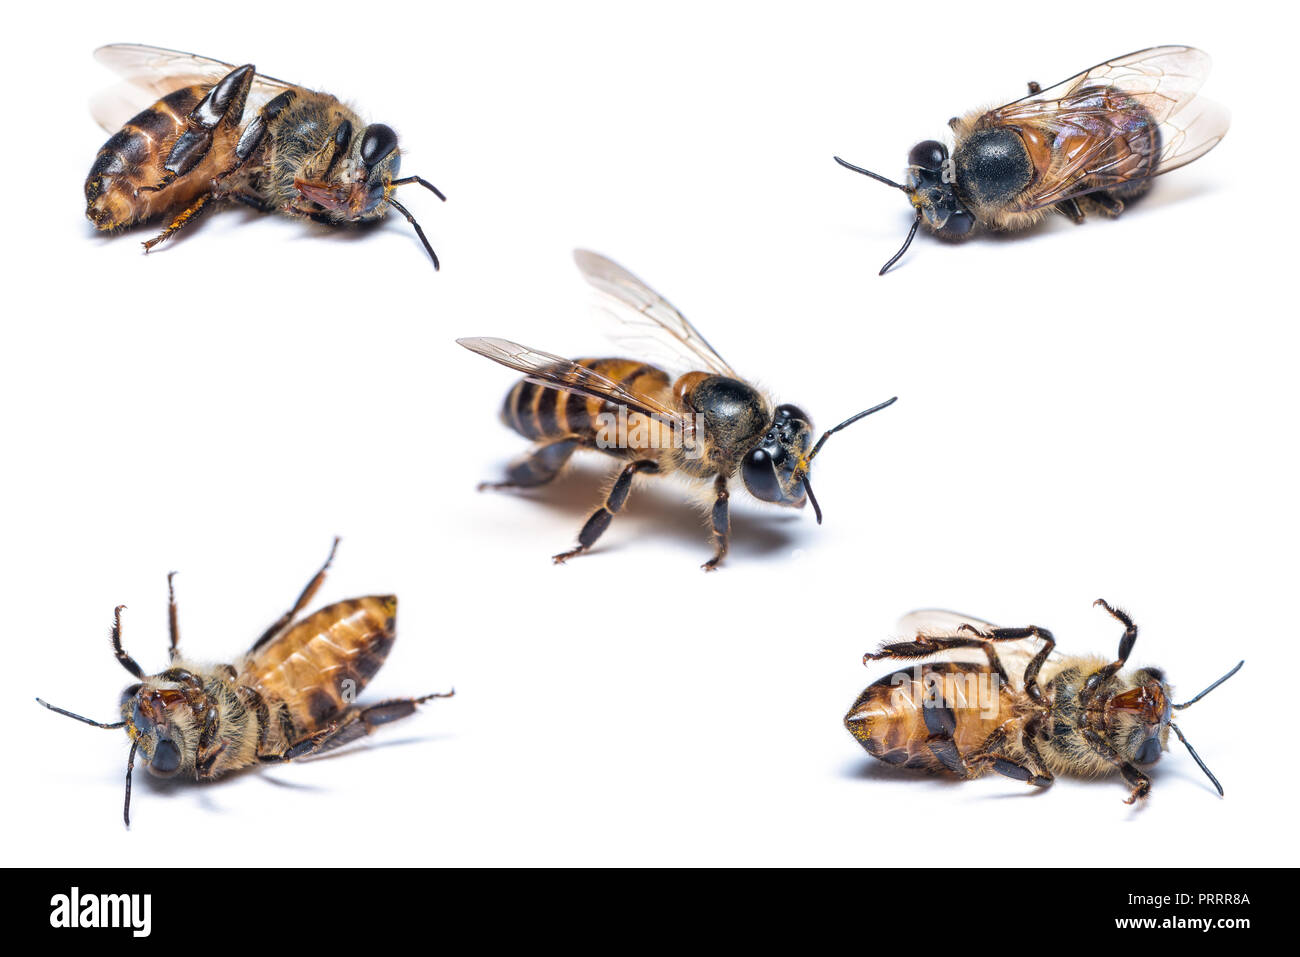 A close up photo of dead honey bee on white background. Stock Photo